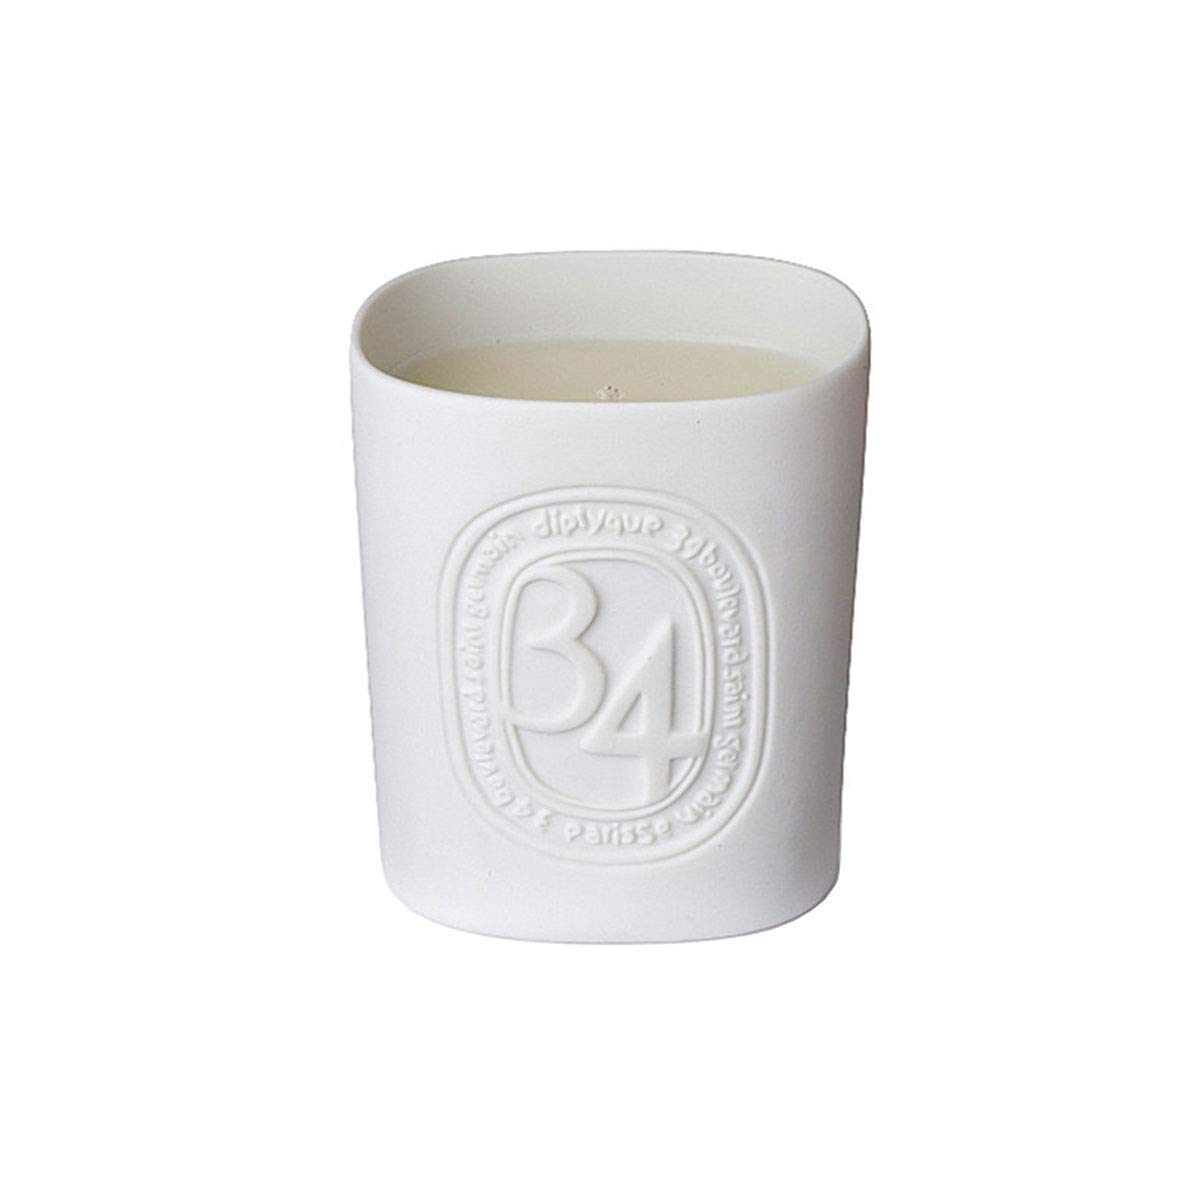 Diptyque 34 Scented Candle 7.5 Oz